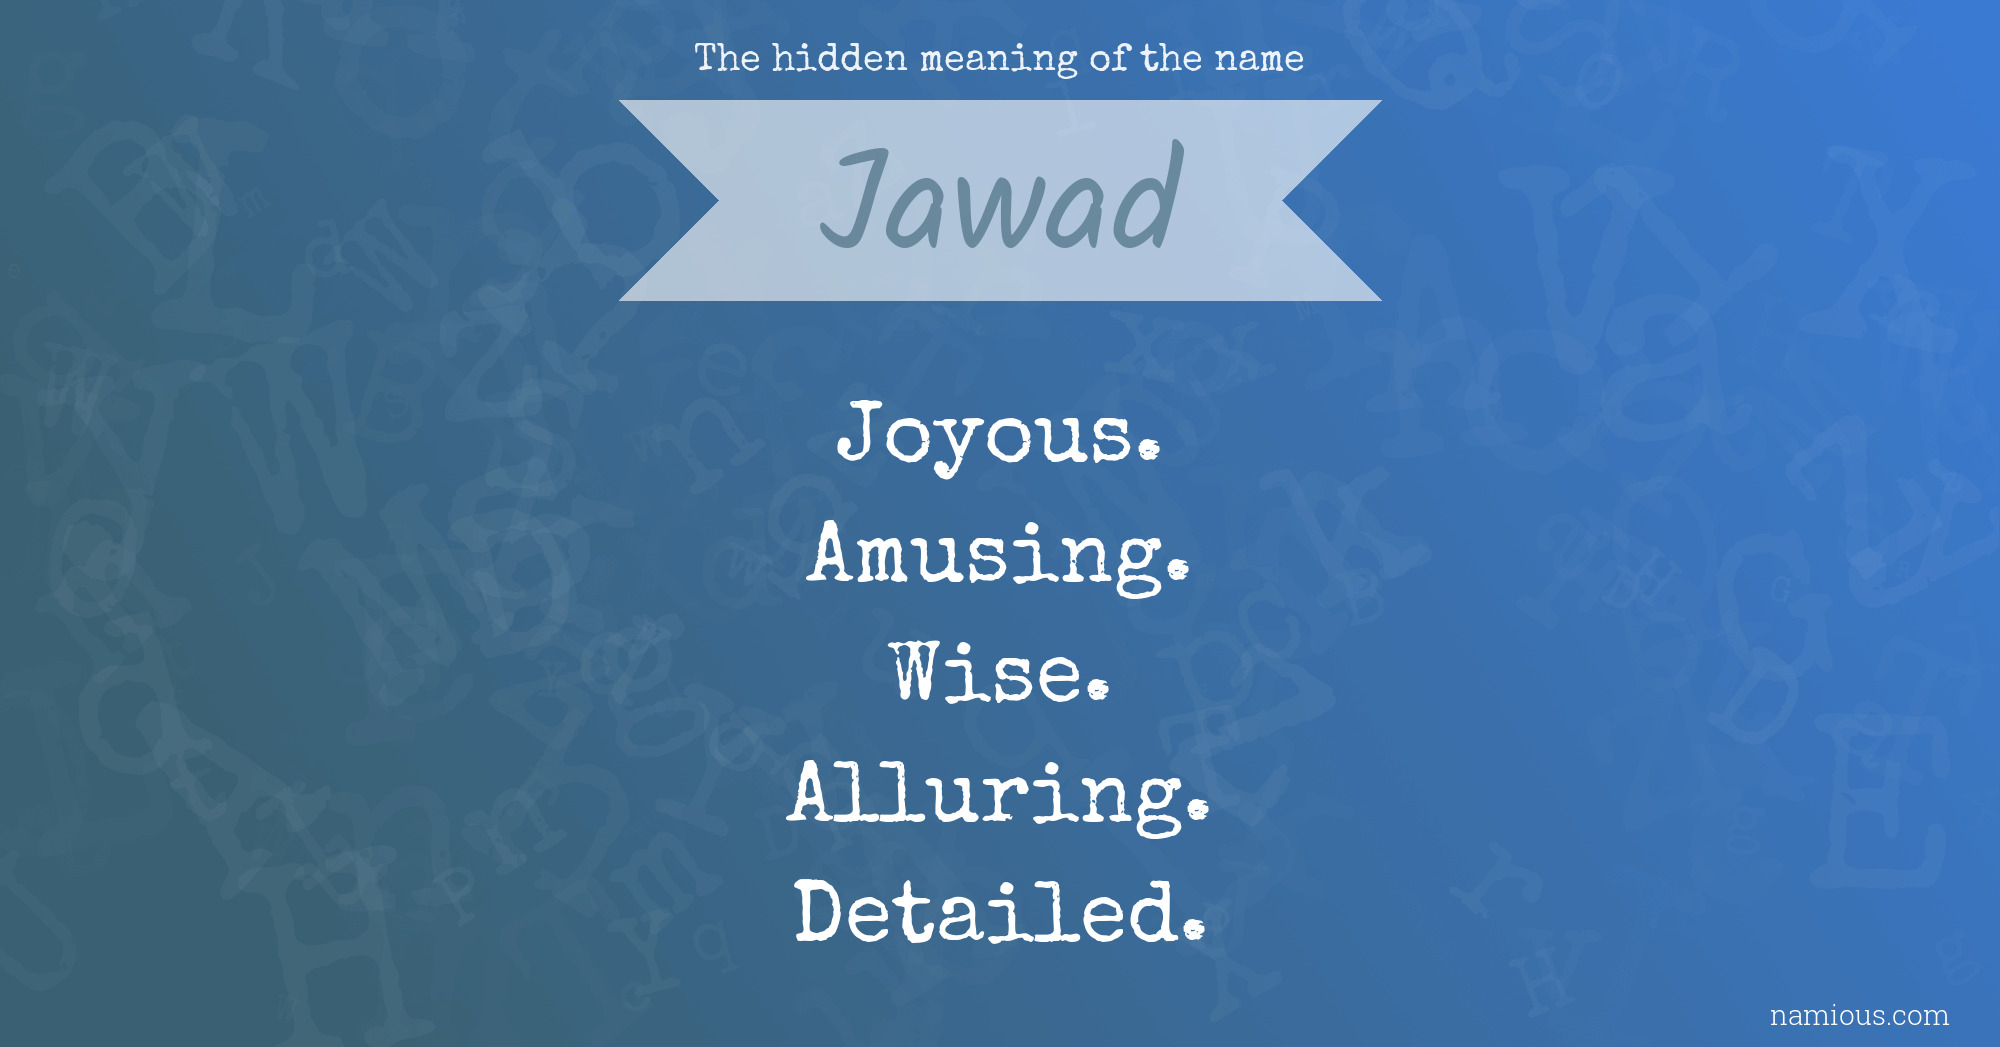 The hidden meaning of the name Jawad